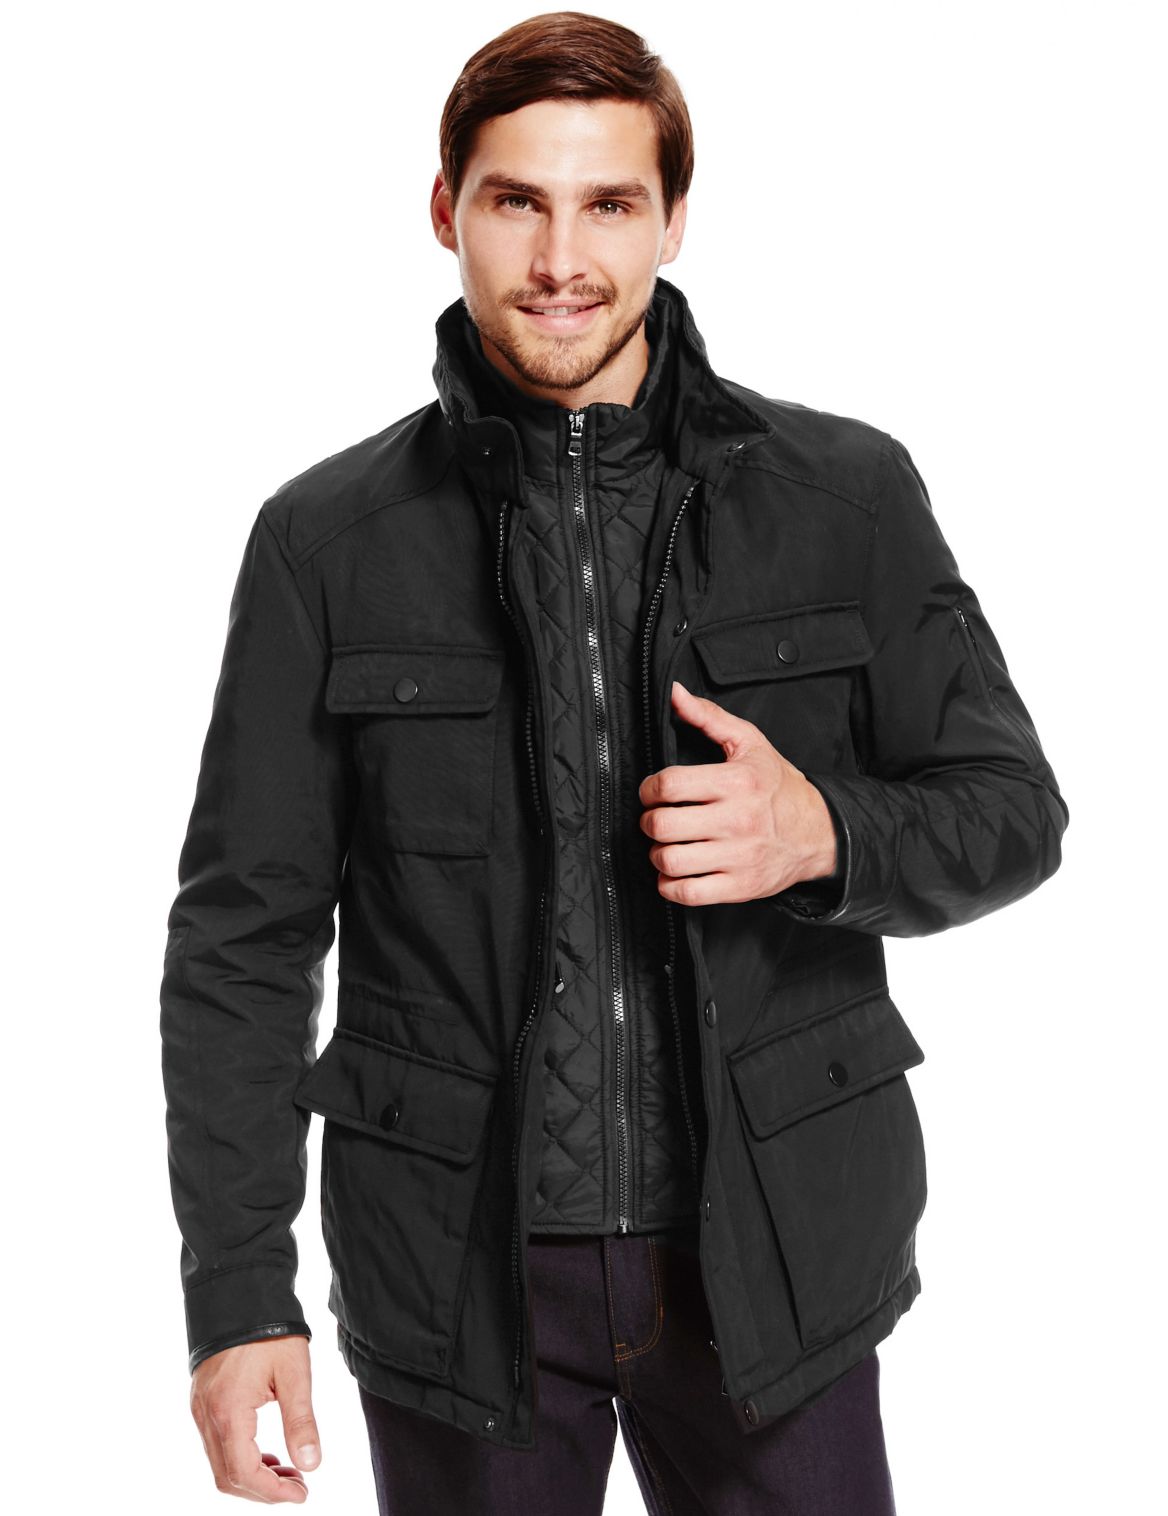 Lightly Padded 4 Pockets Leather Trim Military Jacket With Thinsulateâ